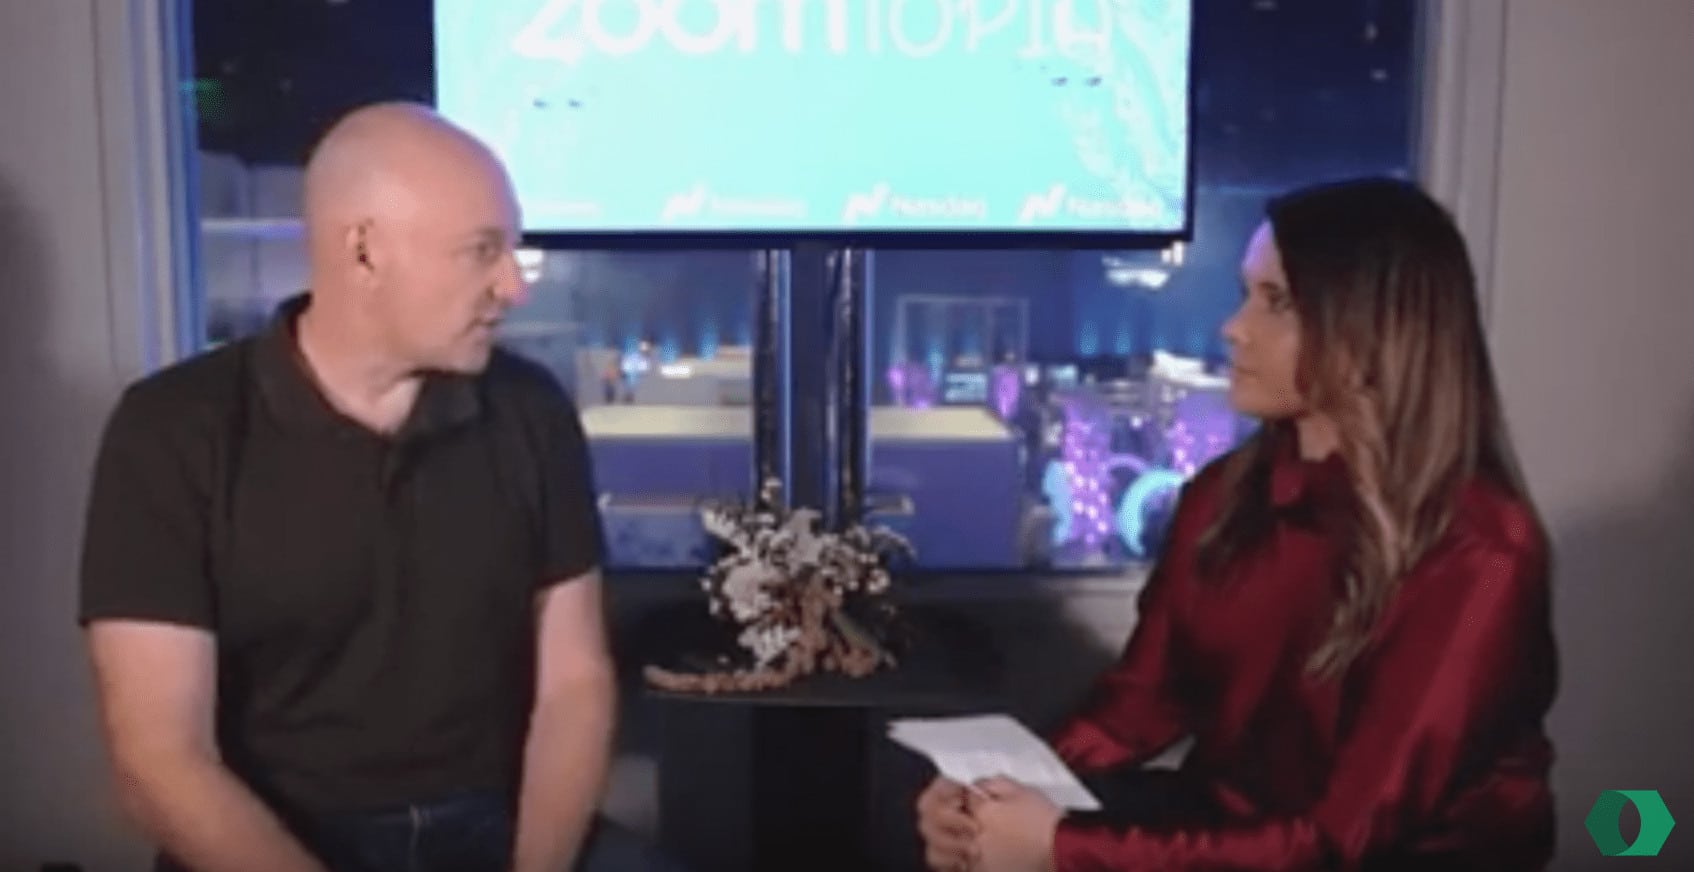 Rich Sutton Co-founder and CTO, Theta Lake at zoomtopia by zoom